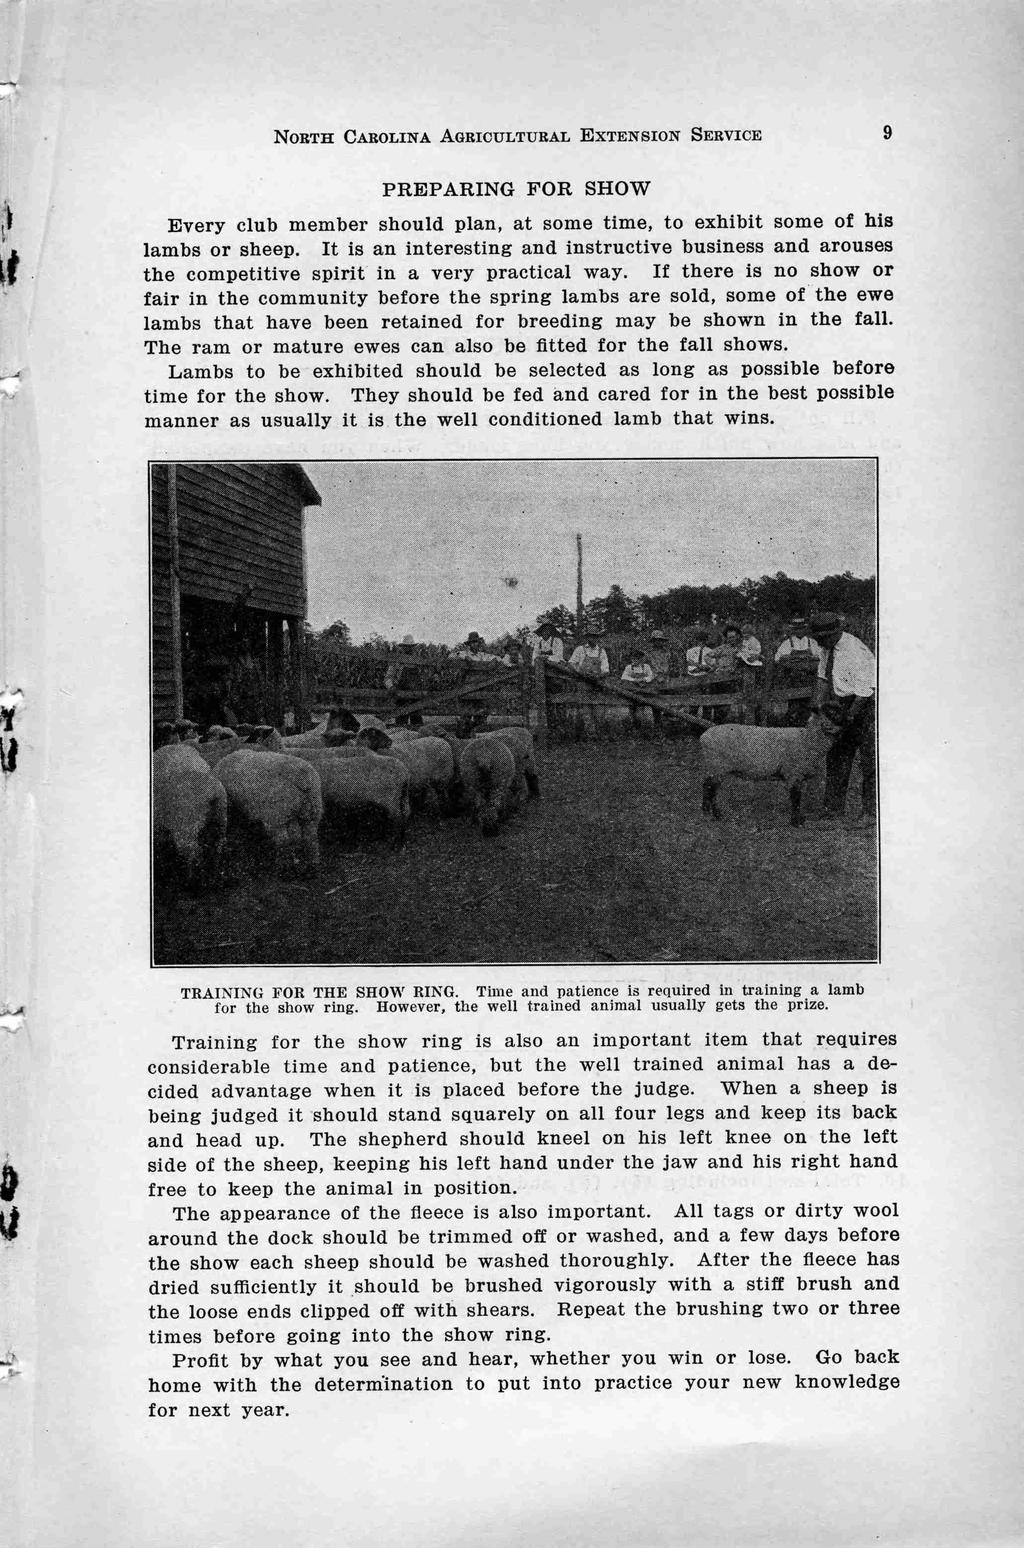 sci-x: ; NORTH CAROLINA AGRICULTURAL EXTENSION SERVICE 9 cr ri- PREPARING FOR SHOW Every club member should plan, at some time, to exhibit some of his lambs or sheep.